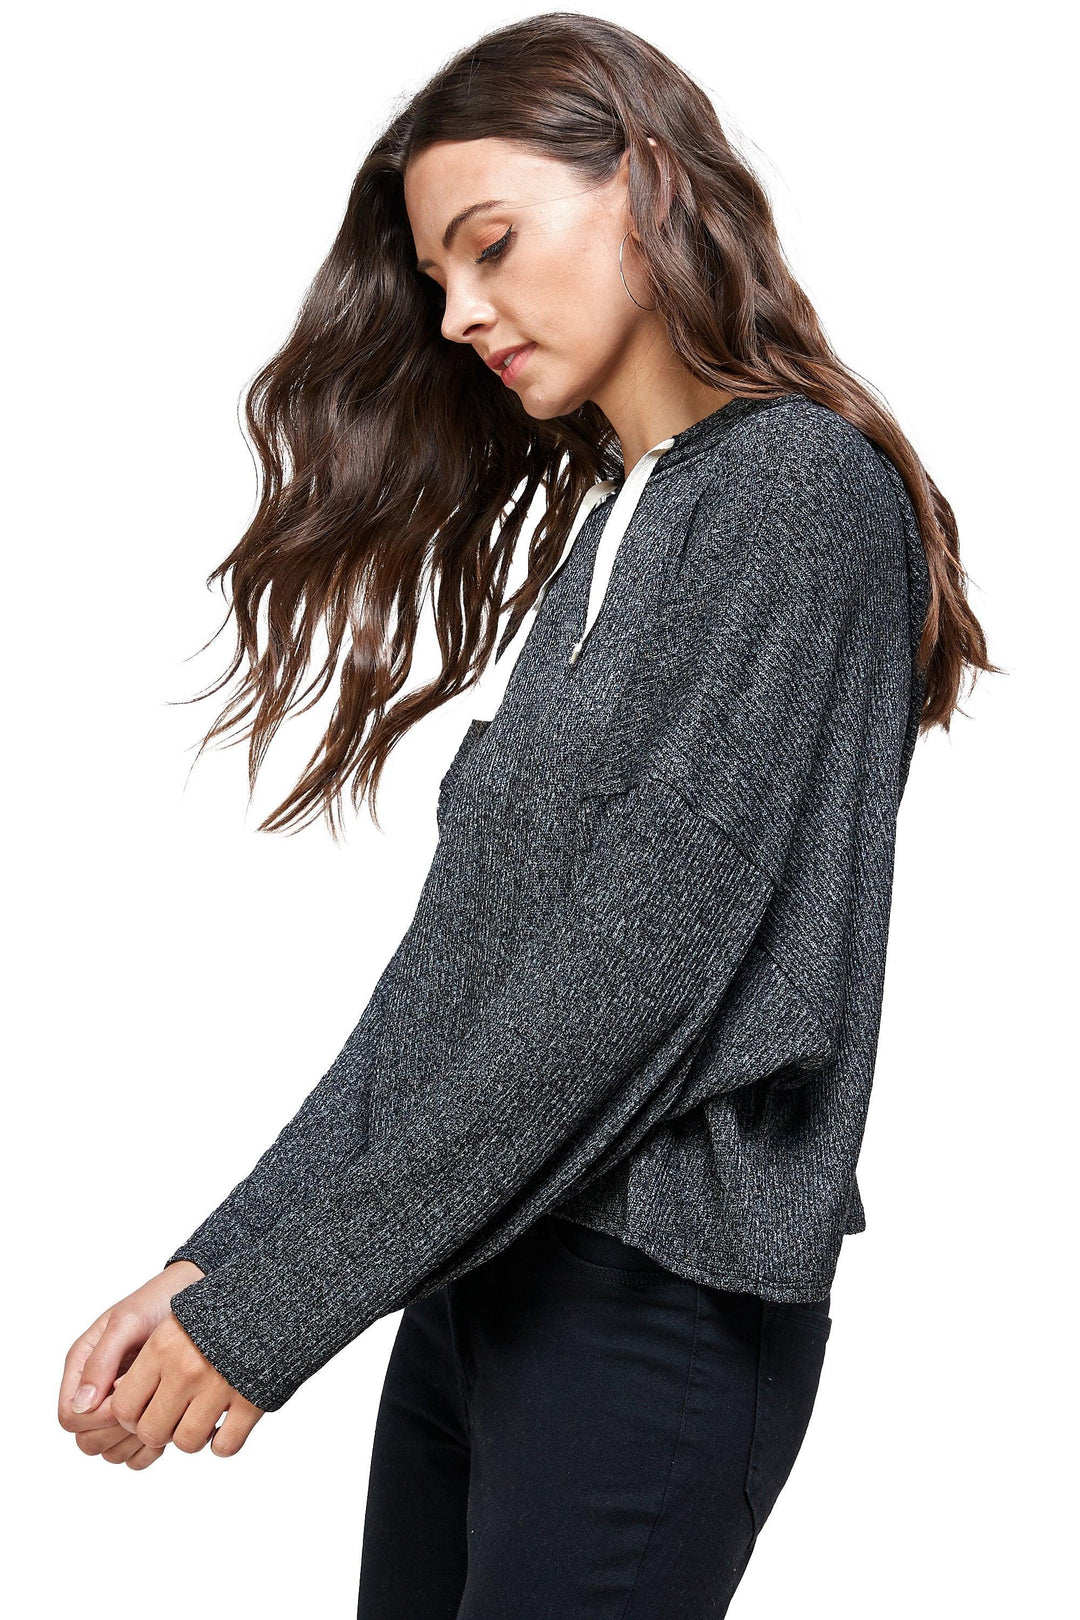 Brushed Two Tone Sweater Rib Hooded Top - Brand My Case